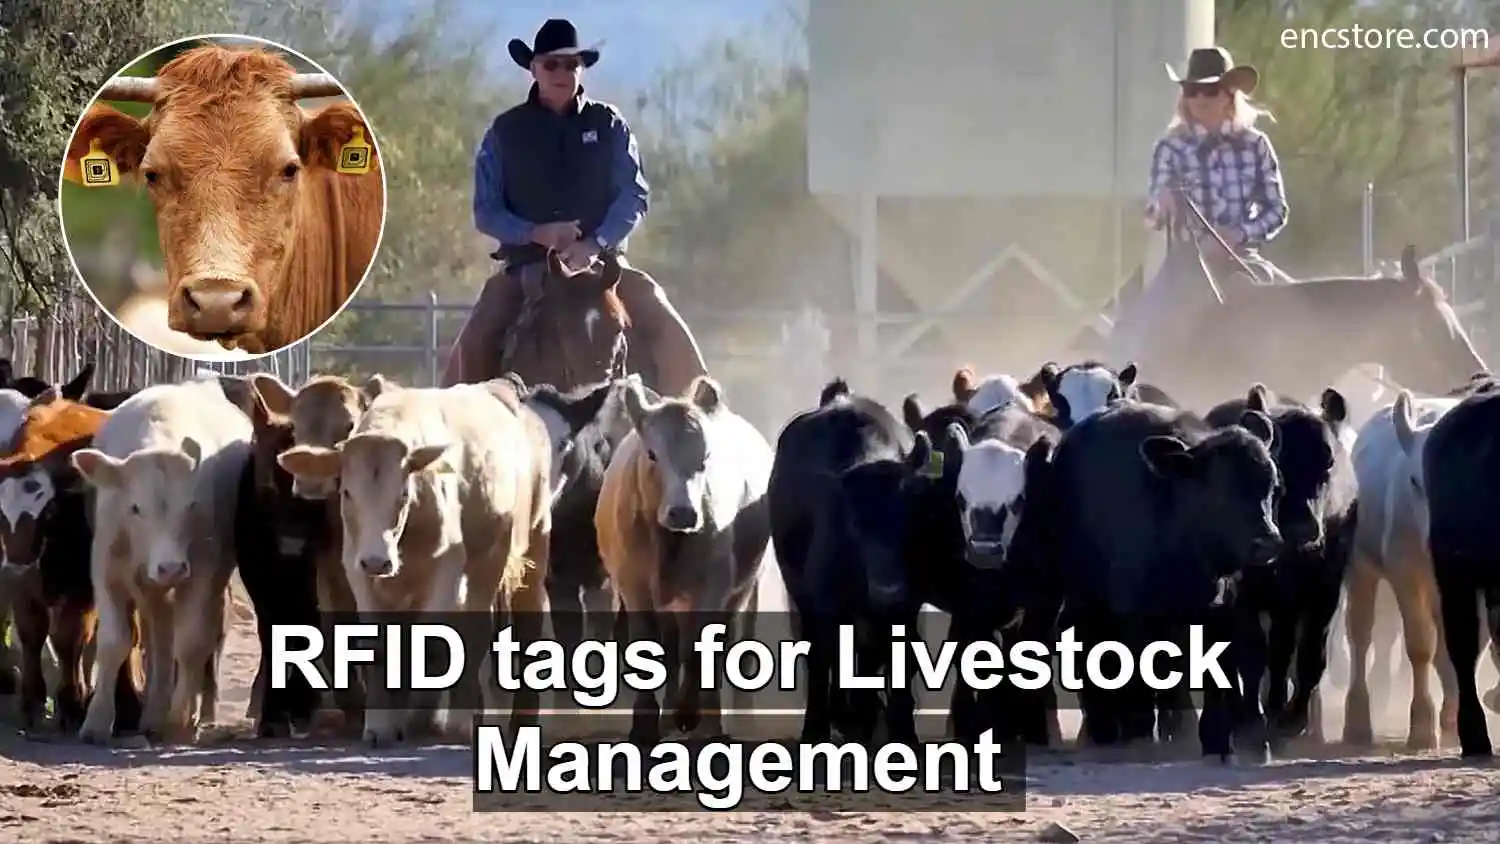 RFID Tags for Livestock Management